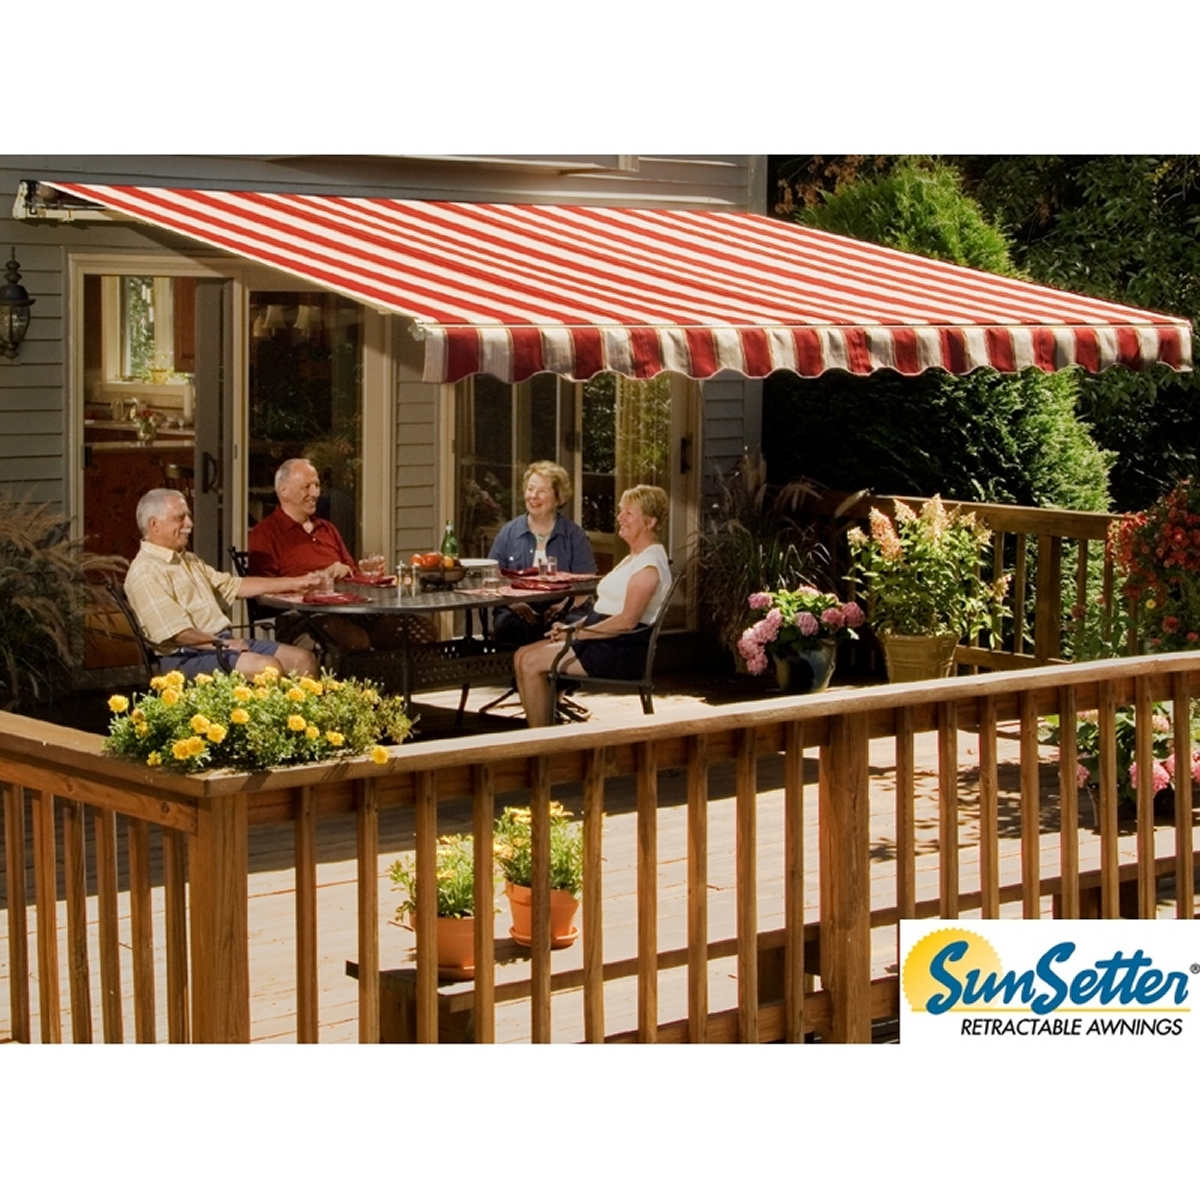 20 Motorized XL Retractable Awning With Woven Acrylic Fabric